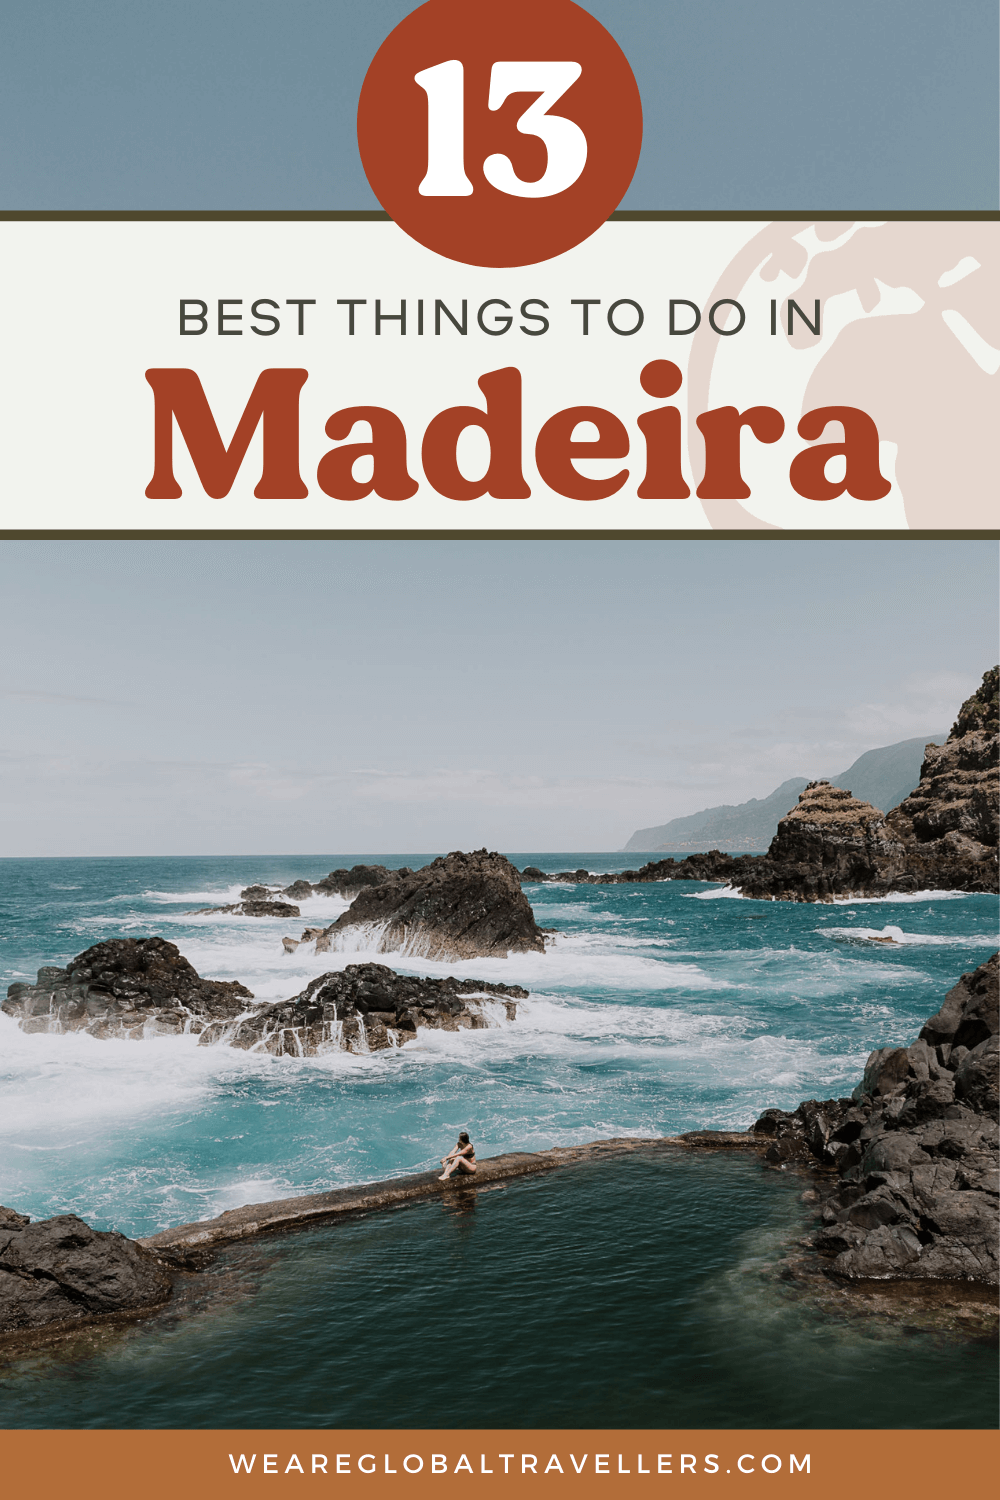 The best things to do in Madeira, Portugal